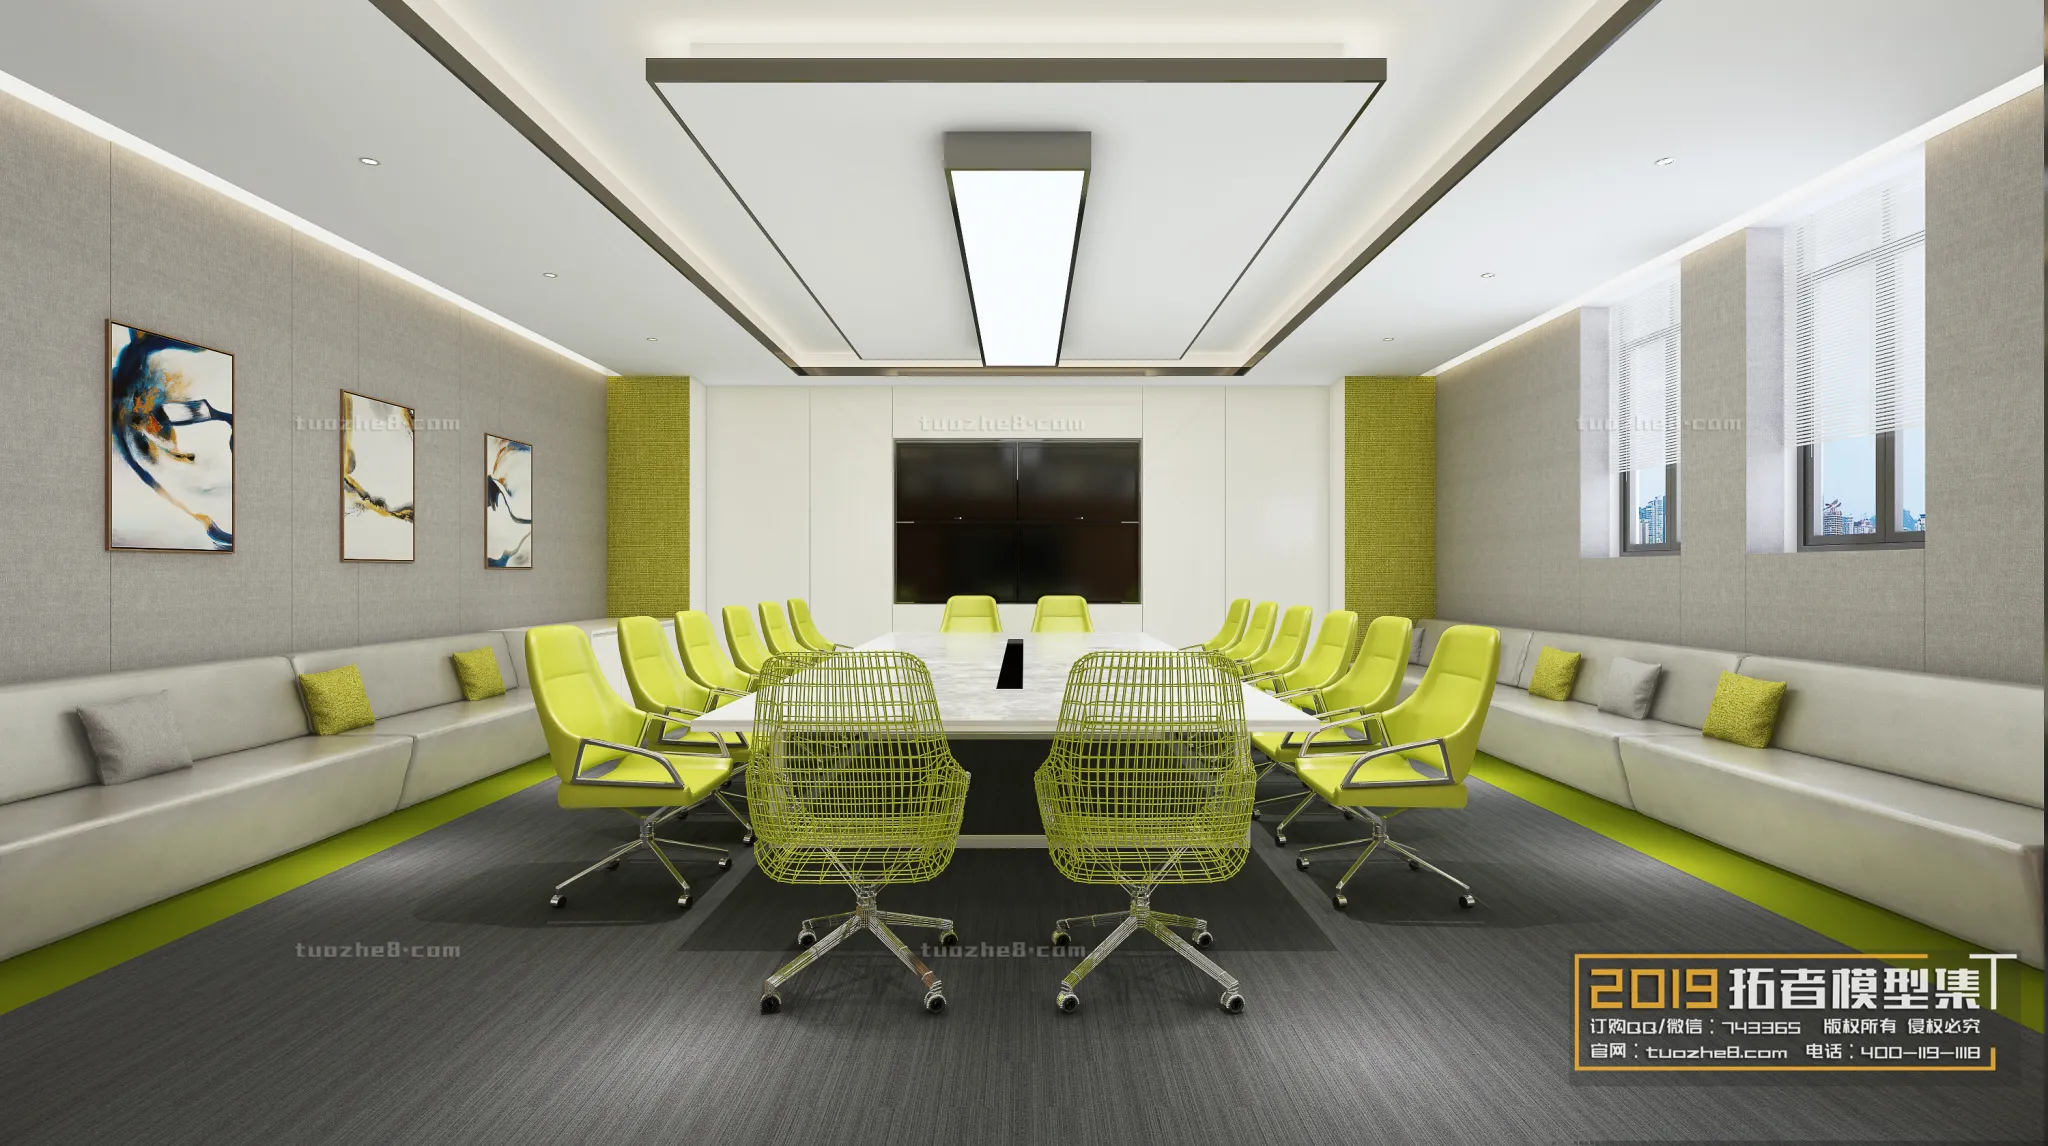 Extension Interior – MEETING  – LECTURE HALL – 008